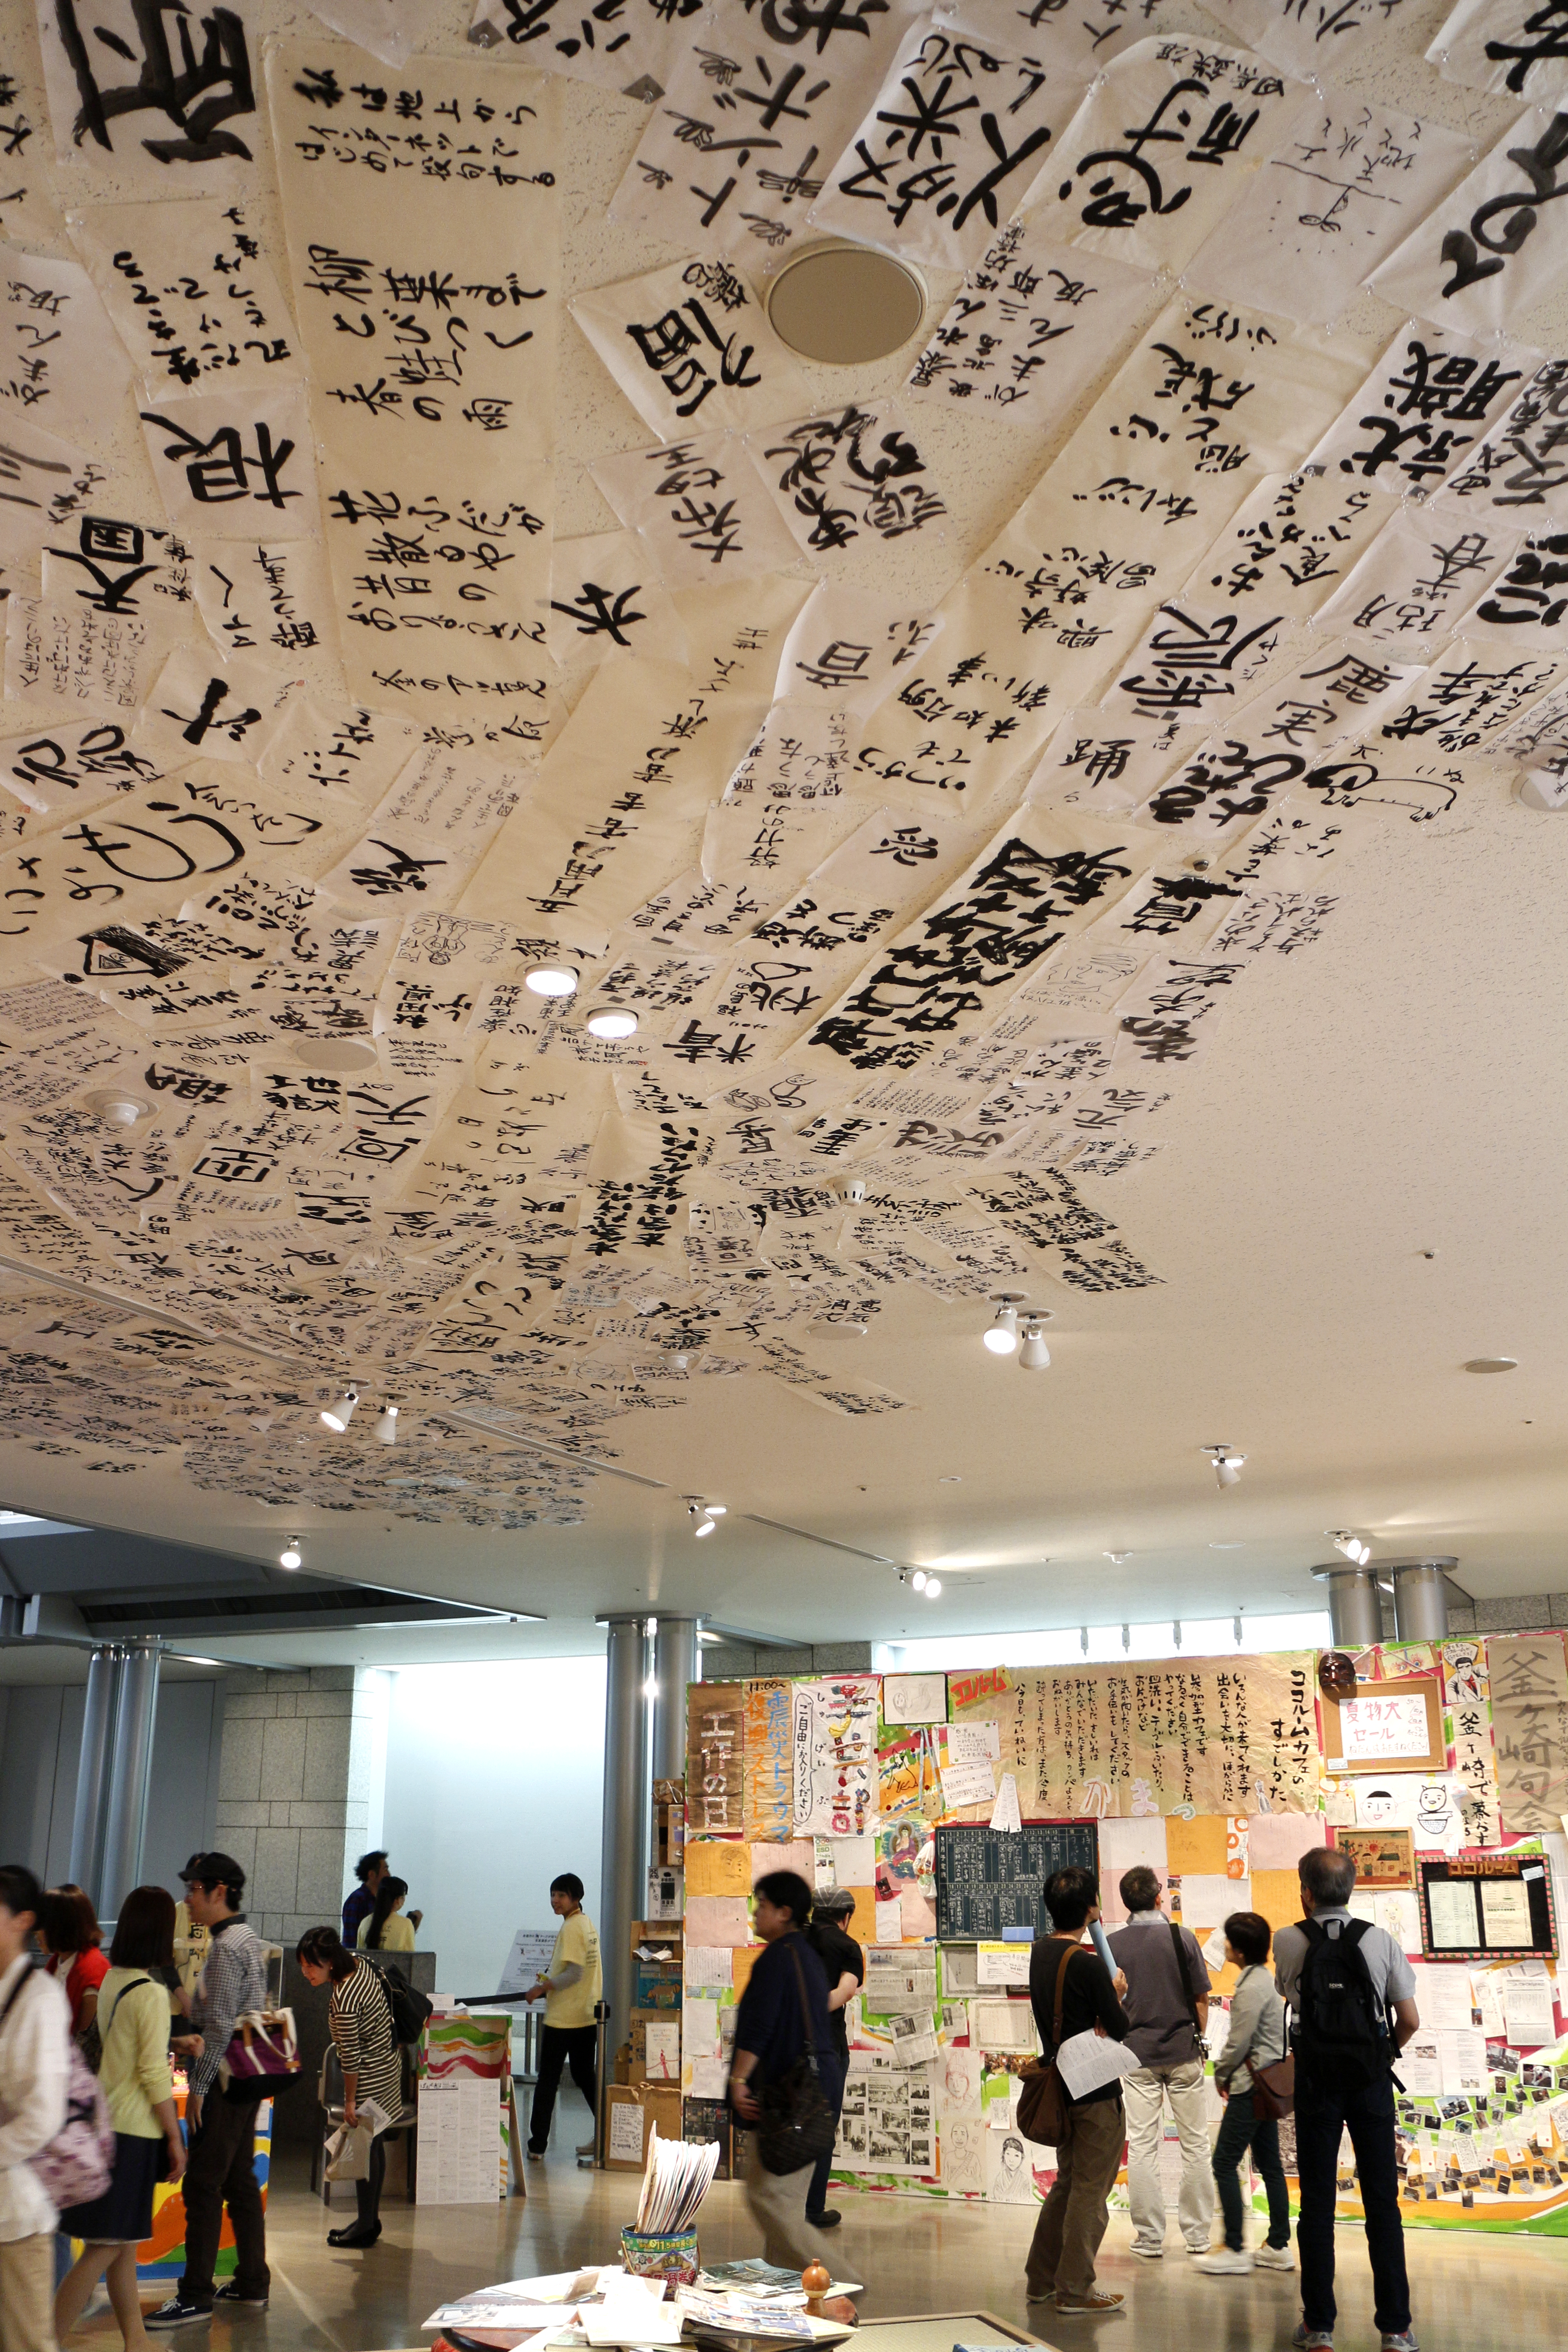 [Figure 13: The Kama Gei exhibit at the 2014 Yokohama Triennale. Various phrases written in ink were mounted on the ceiling]